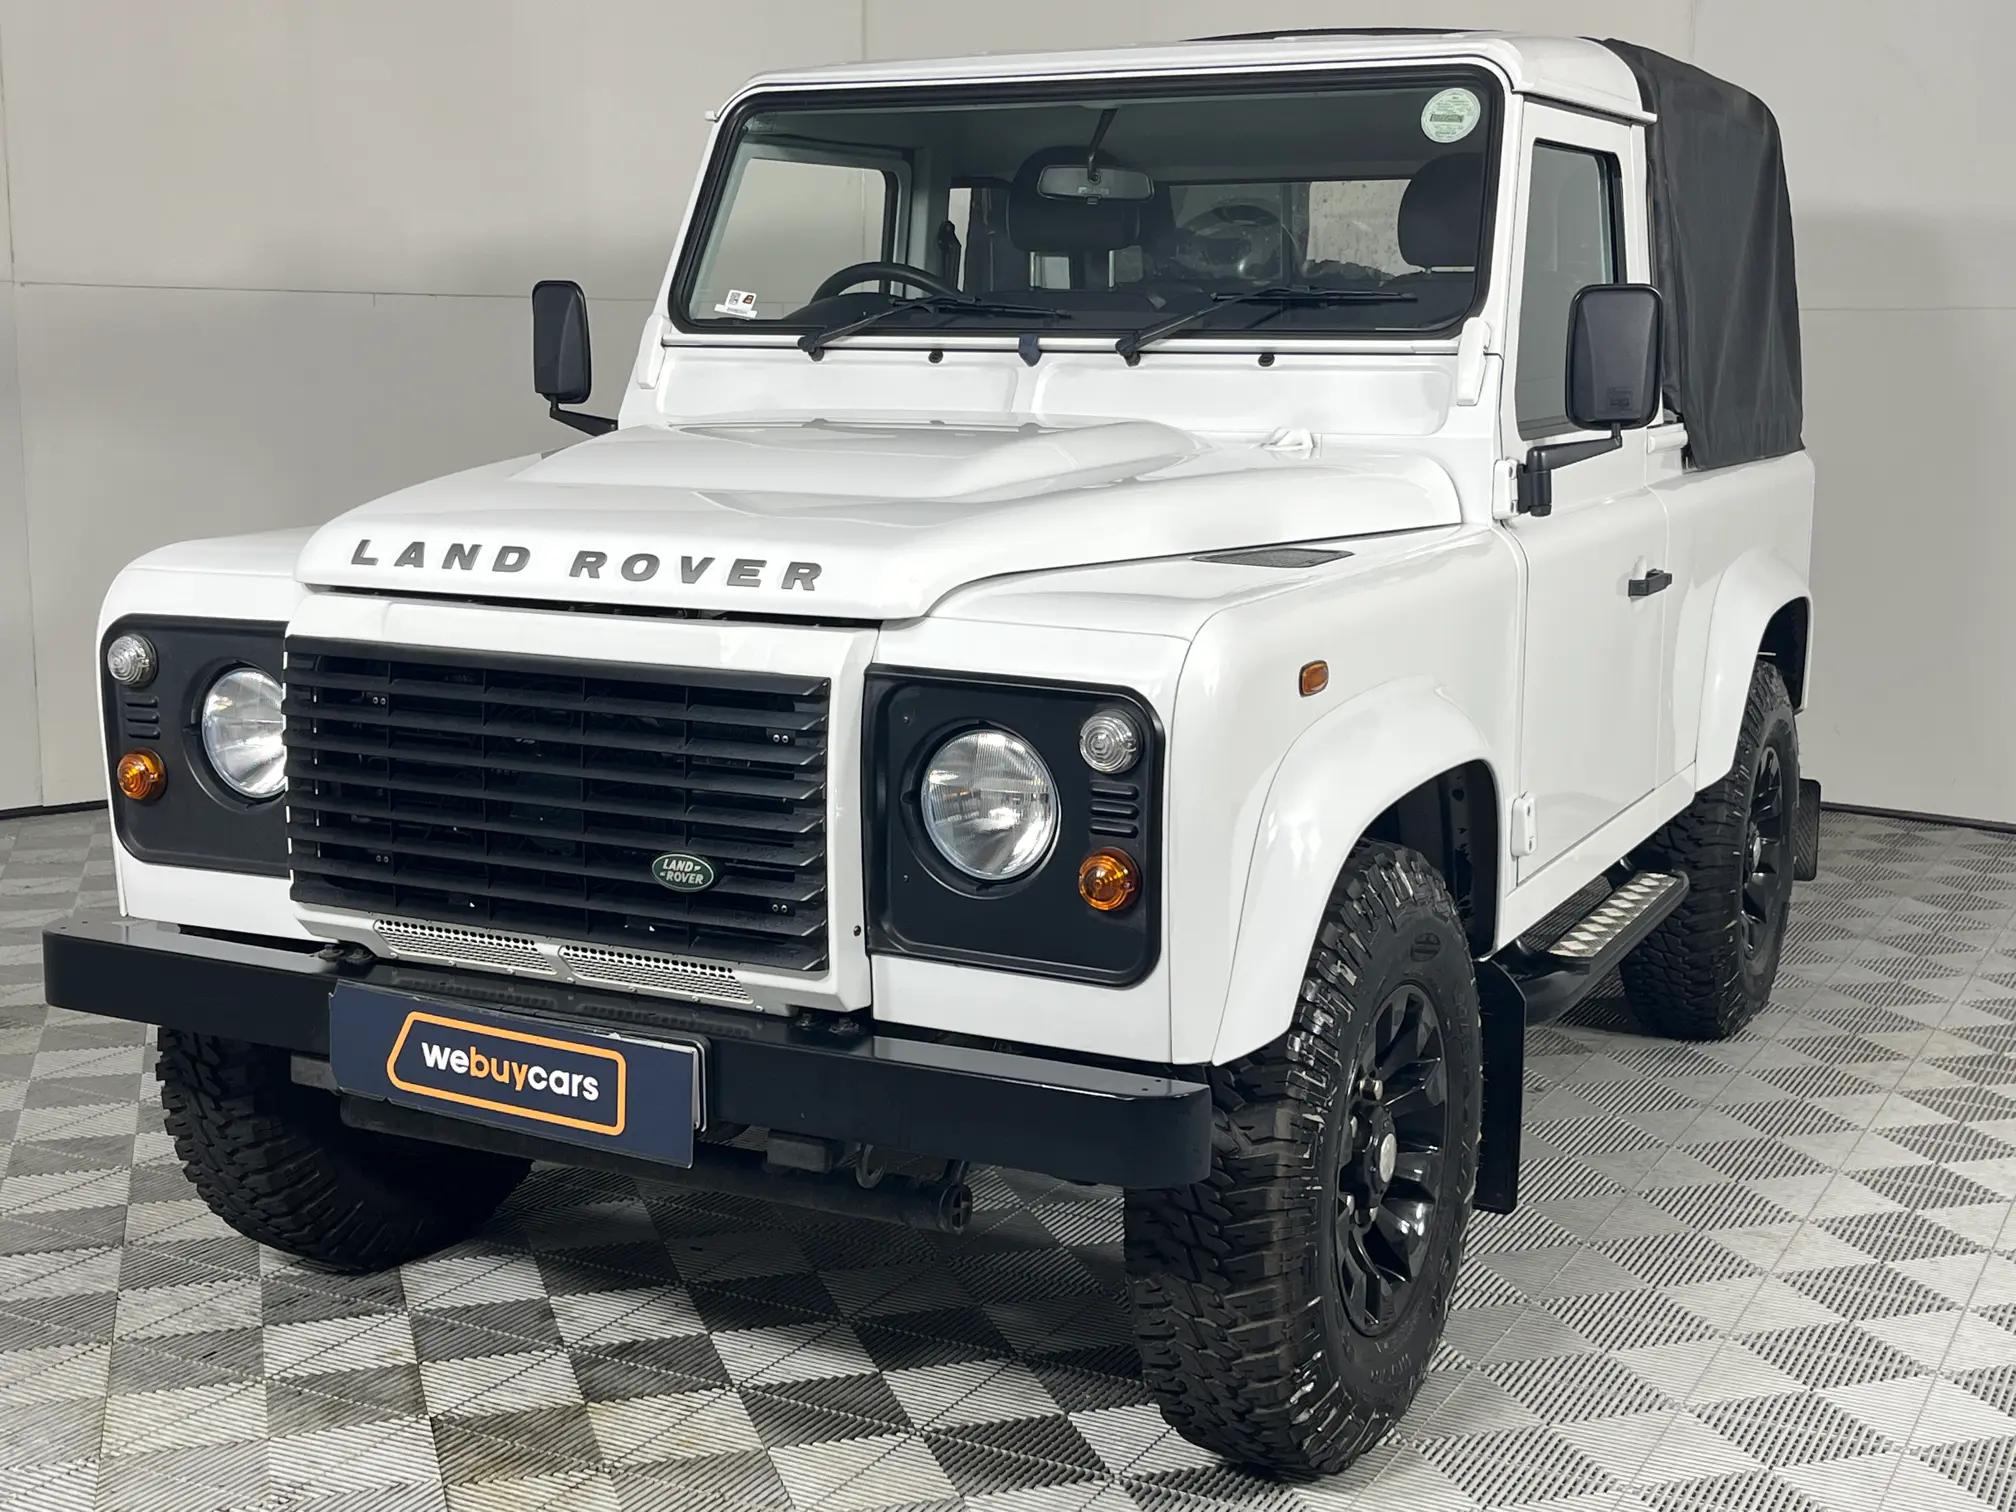 Land Rover Defender 90 2.2 D Station Wagon LE (Black/Silver Edition)